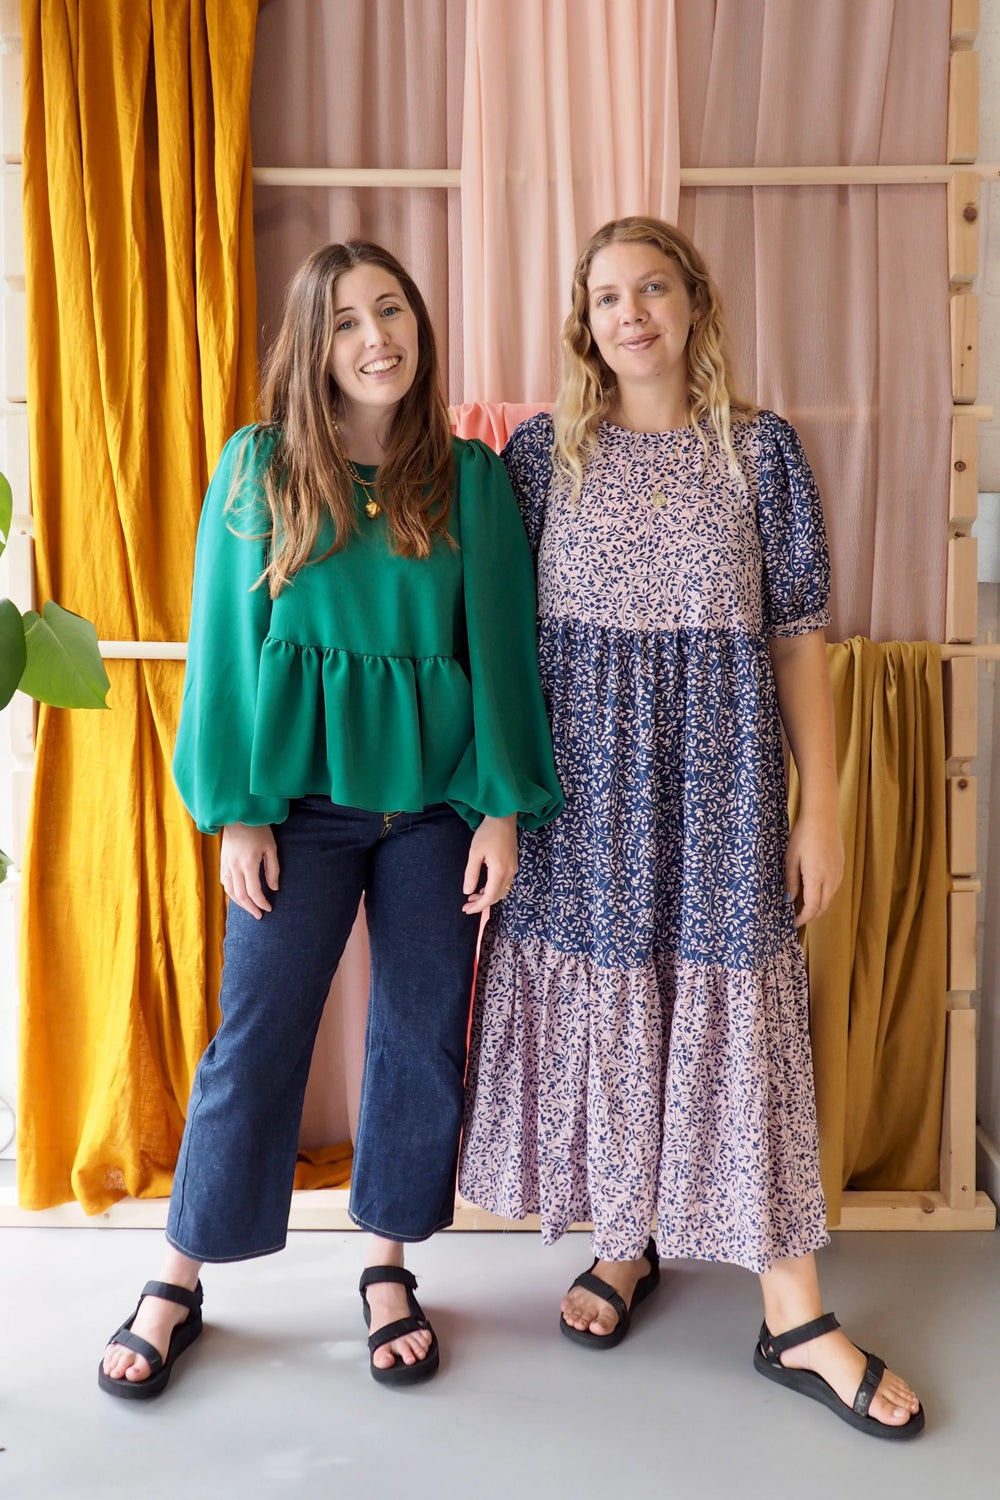 Women wearing the Everyday Dress and Top sewing pattern from The New Craft House on The Fold Line. A dress and top pattern made in linen, cotton or double gauze fabrics, featuring long or short puff sleeves, round neck, peplum for the top, tiered midi ski